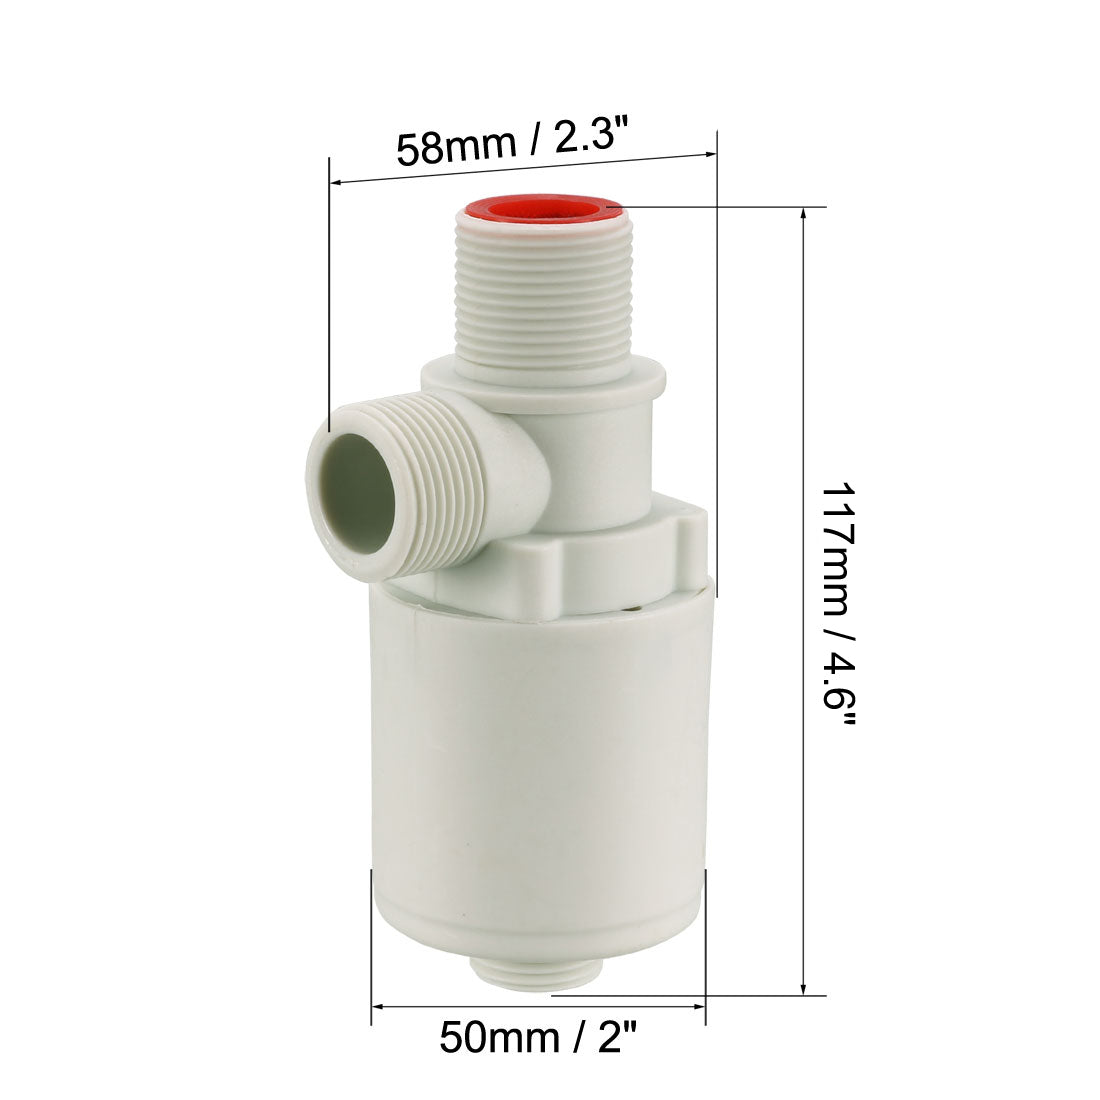 uxcell Uxcell Float Ball Valve G3/4 Thread Plastic Vertical Exterior Water Liquid Level Control Sensor Automatic with Filter